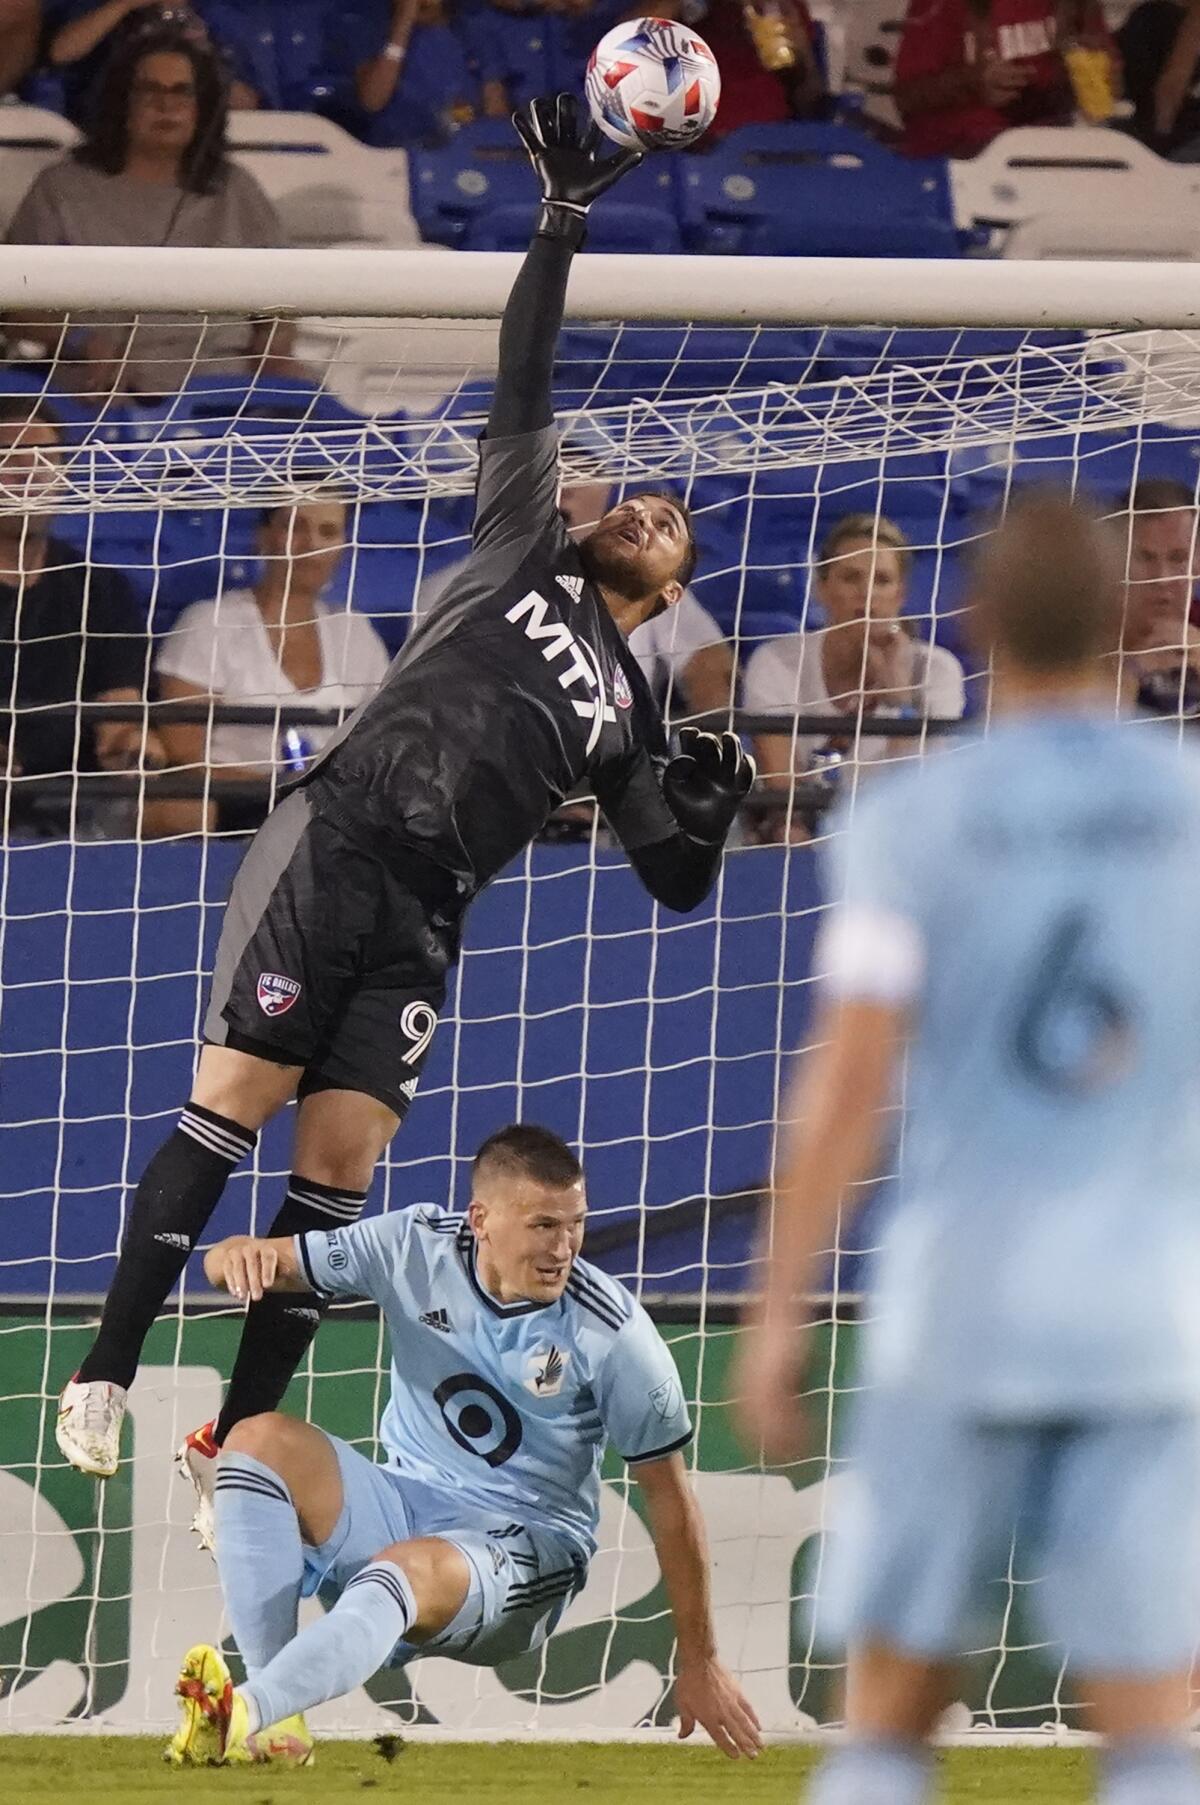 FC Dallas goalkeeper Phelipe Megiolaro (99) makes a save against Minnesota United midfielder Robin Lod (17) during the second half of an MLS soccer match Saturday, Oct. 2, 2021, in Frisco, Texas. (AP Photo/LM Otero)